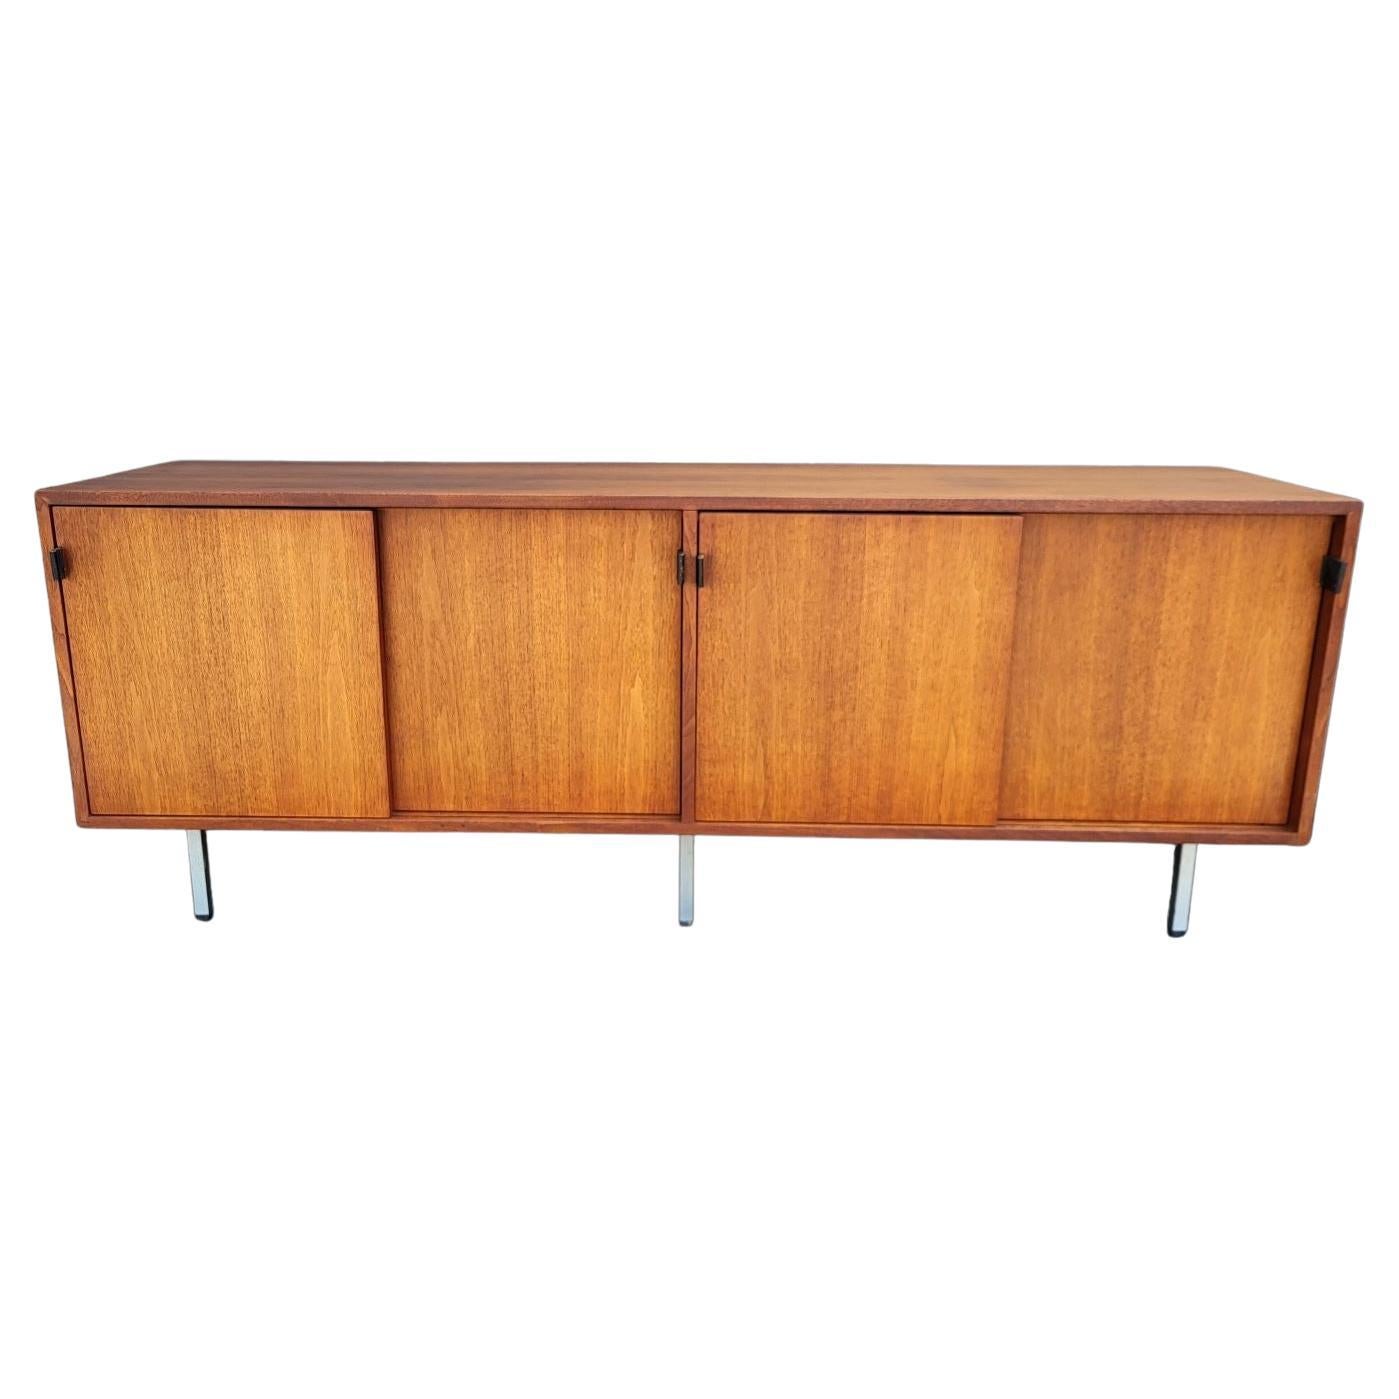 Florence Knoll For Knoll Mid Century Modern Credenza C.1963 For Sale